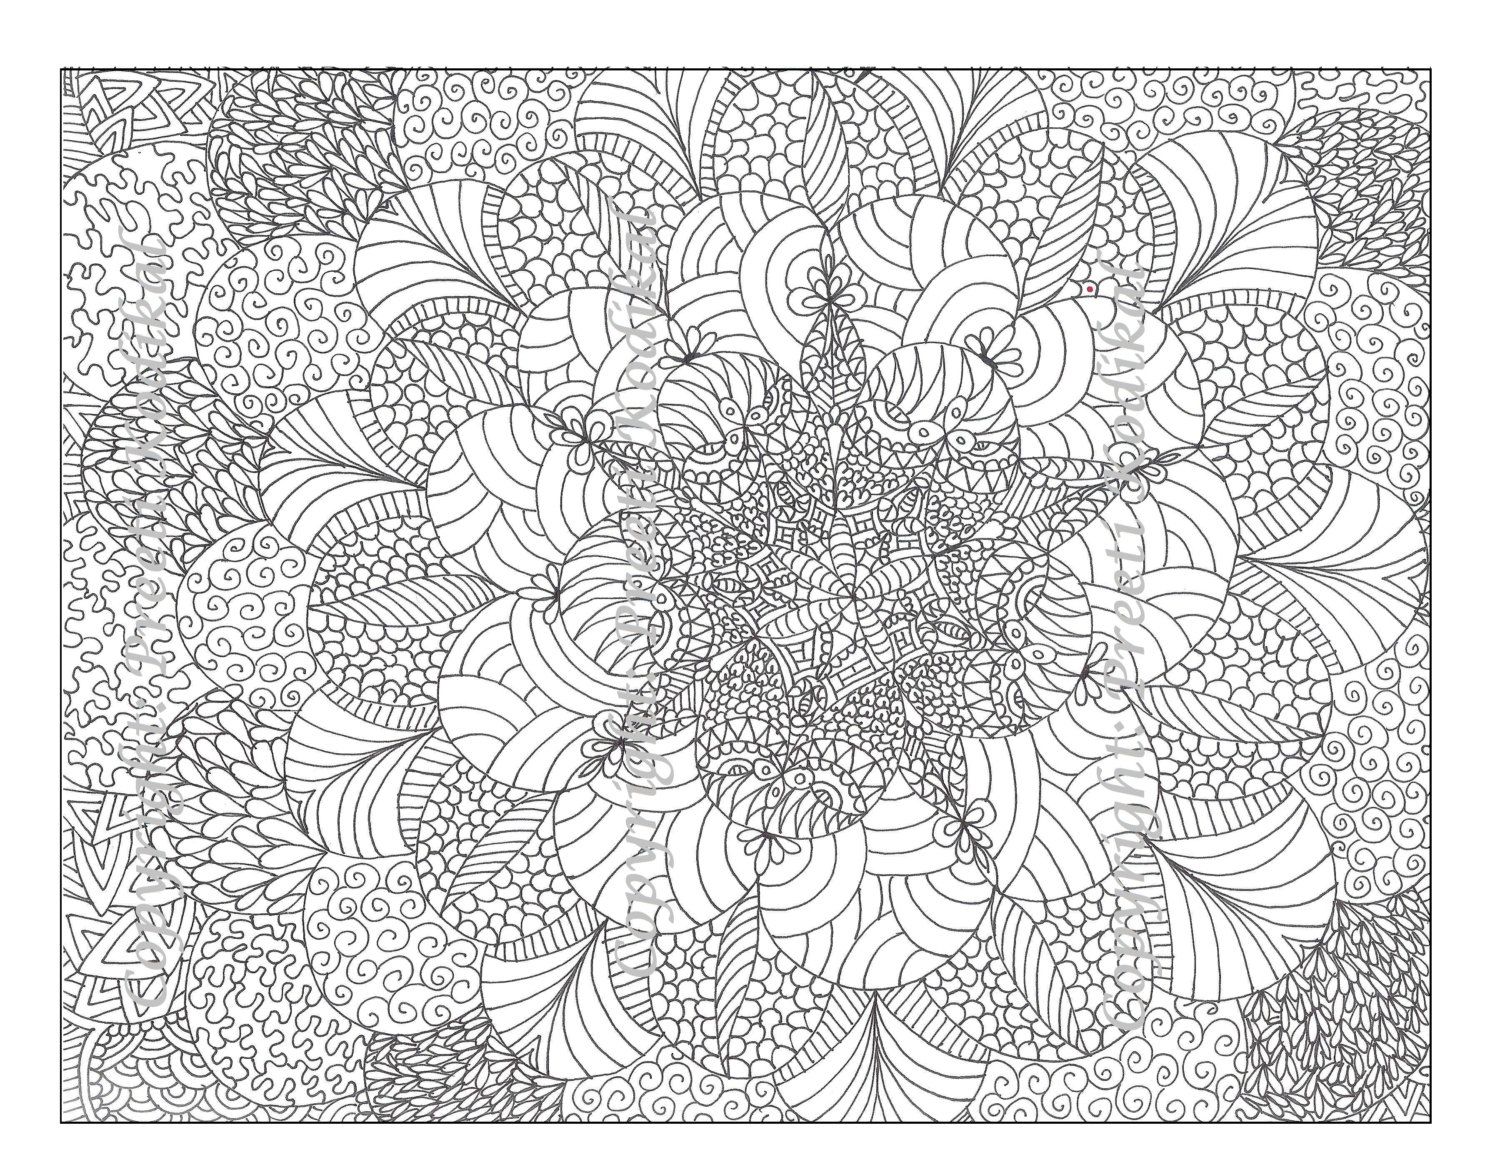 my abstract coloring pages are filled with detailed groovy designs ...